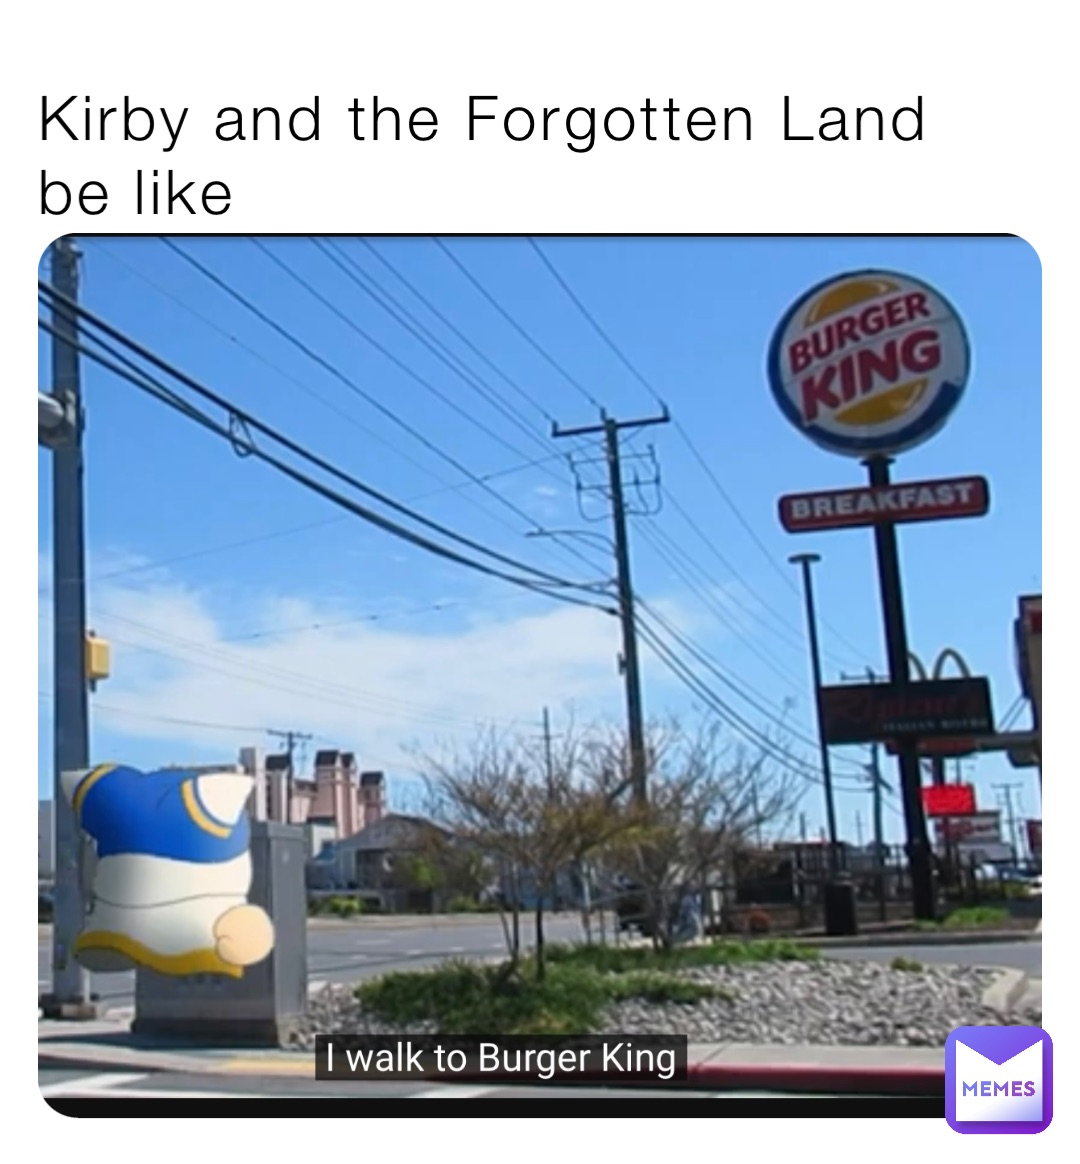 Kirby and the Forgotten Land be like